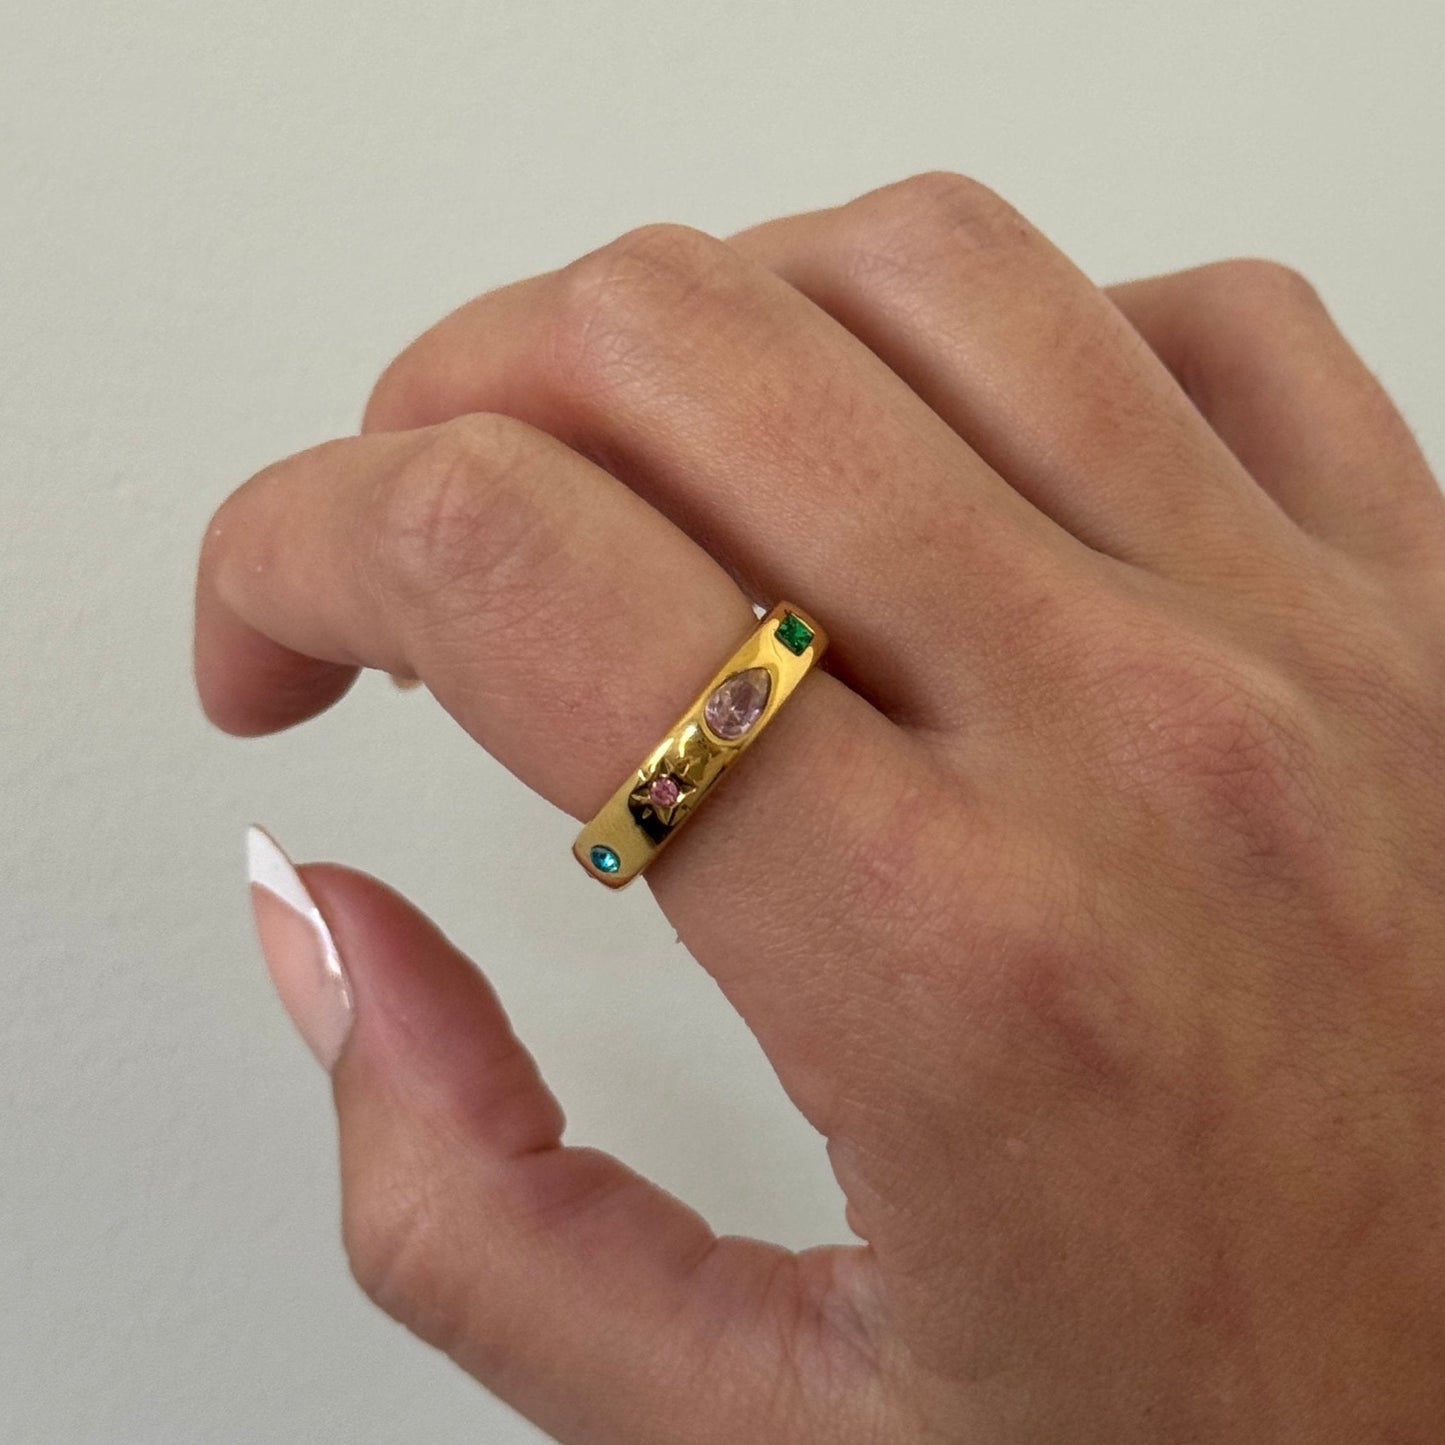 Gold Minimalist Ring, gemstone ring, gifts for her, rings for women, gold filled ring, gold rings for women, stackable rings, unique rings